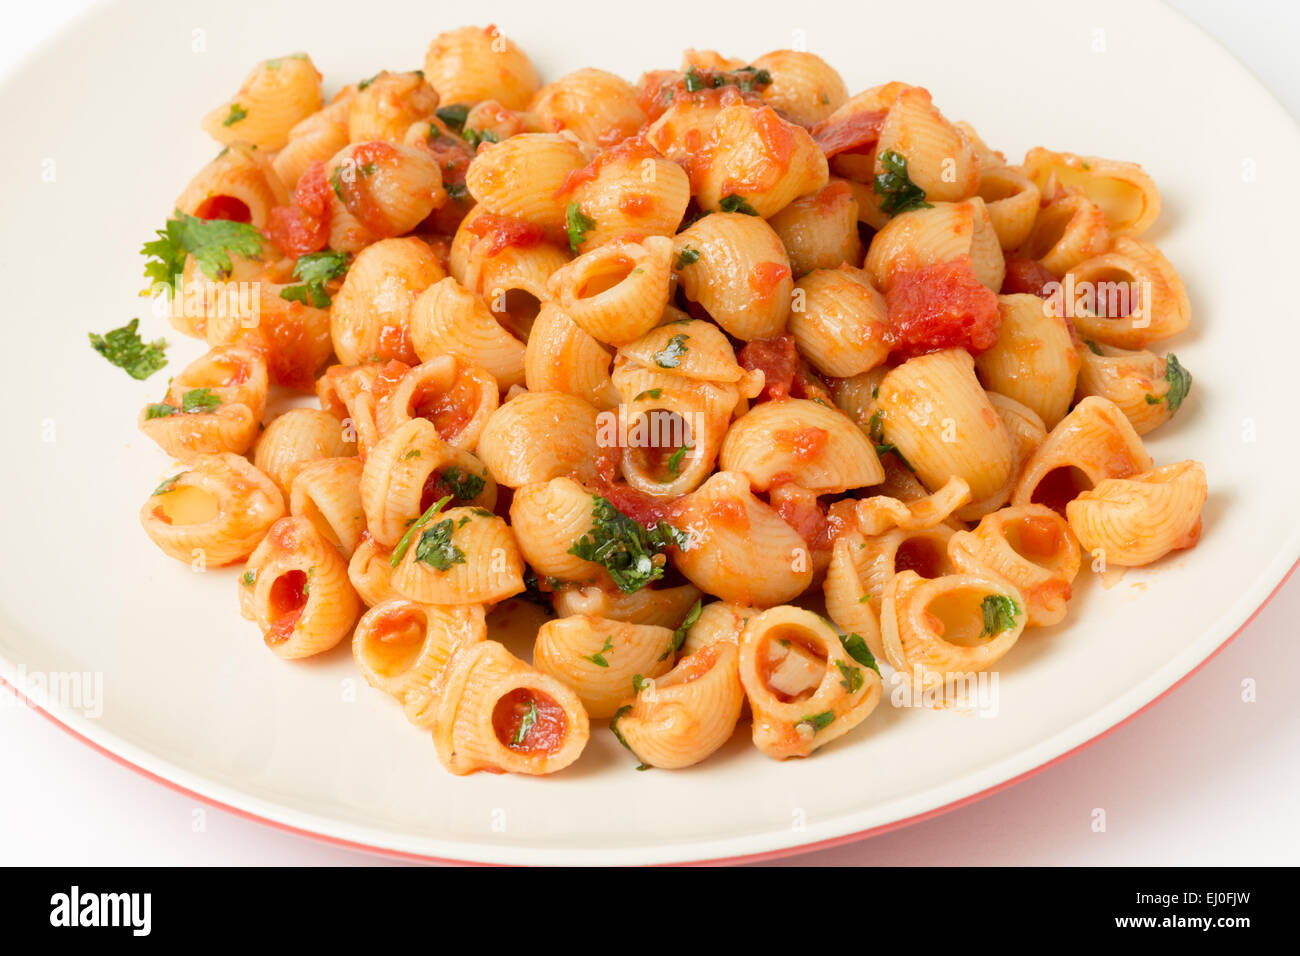 Gomiti elbow pasta shells tossed in arrabbiata tomato, garlic and chili sauce and served with chopped parsley Stock Photo